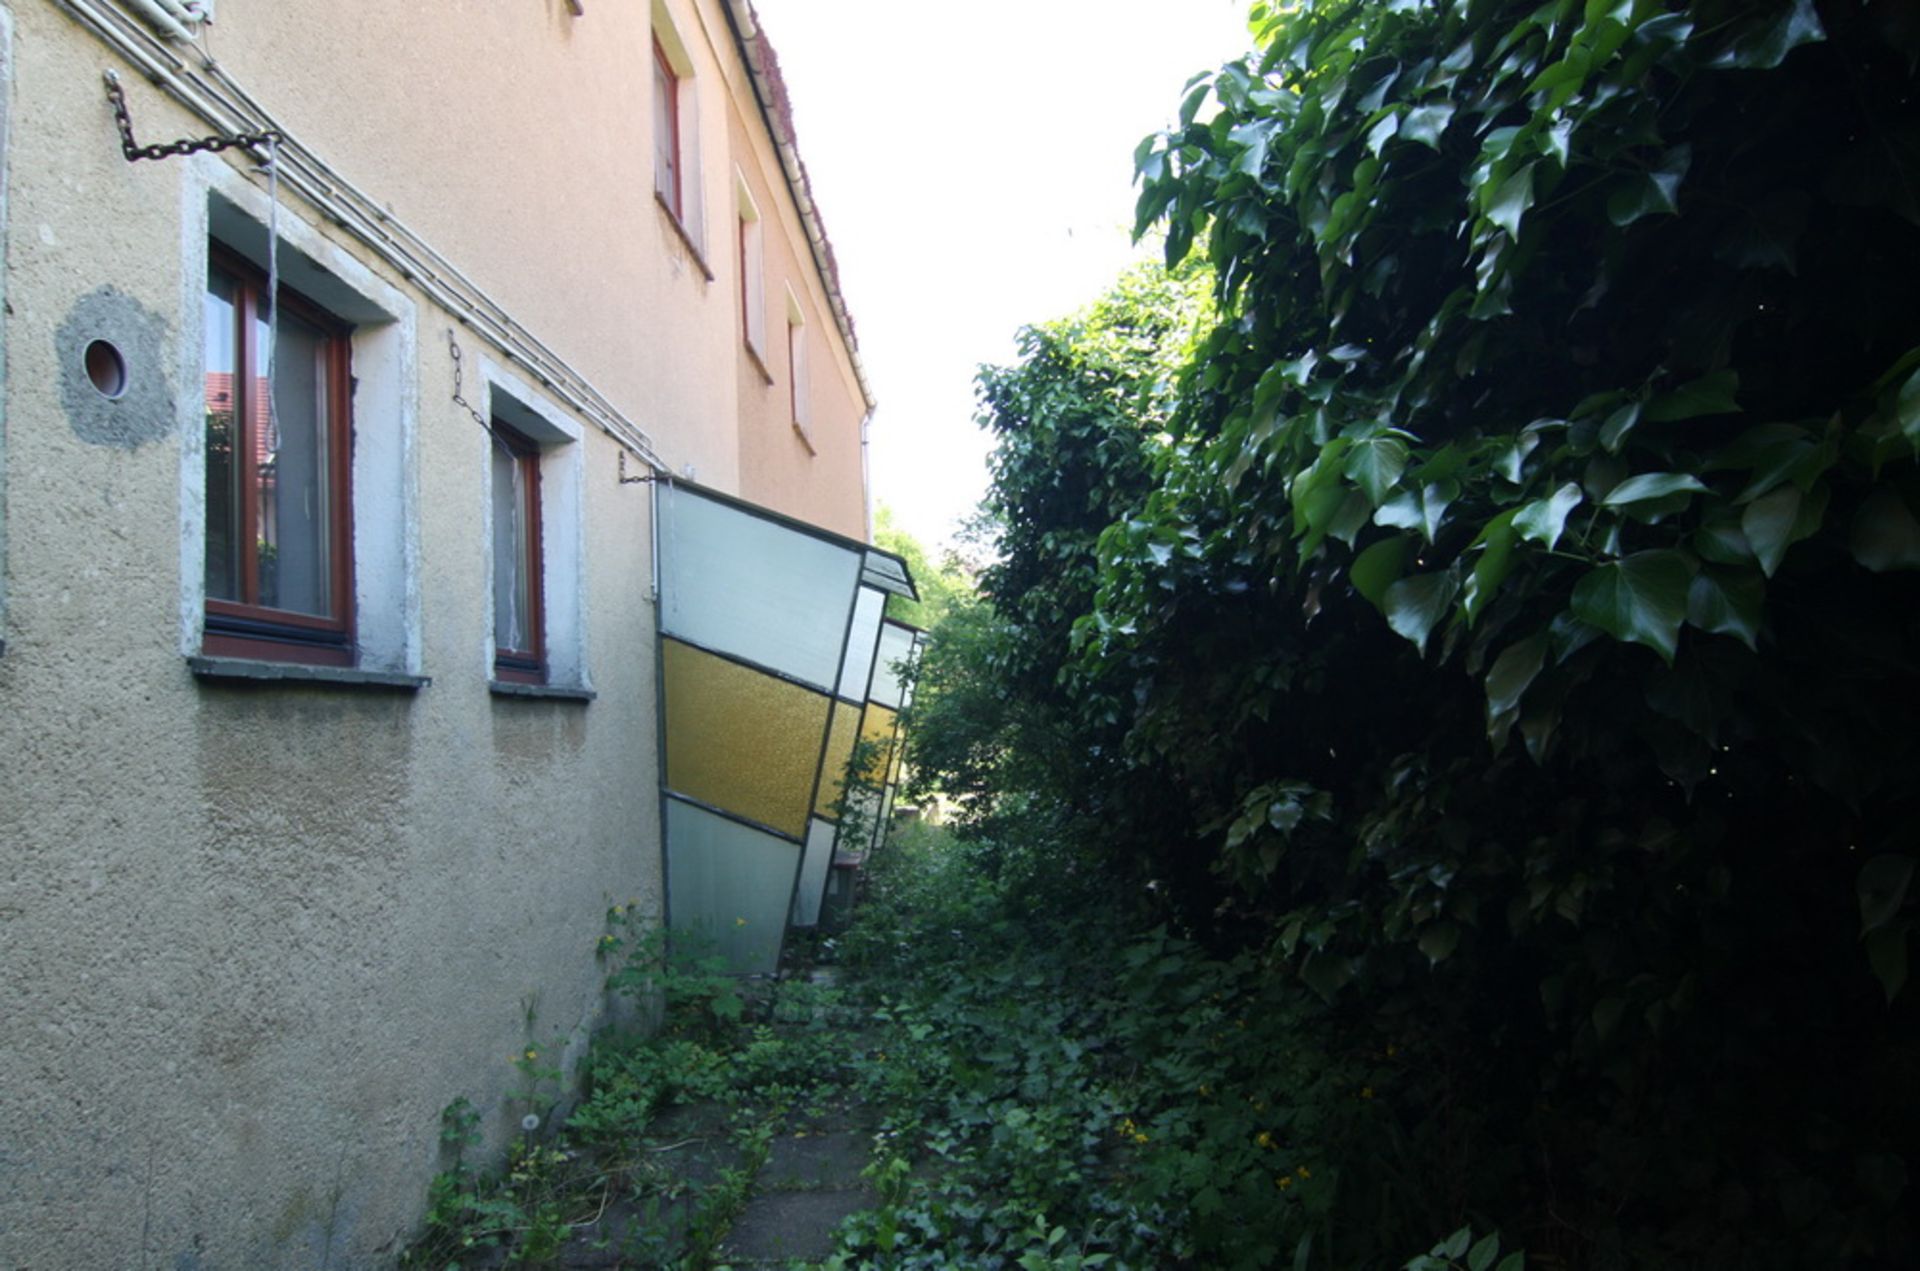 LARGE HOUSING BLOCK HORNSOMMEM, GERMANY READY TO MOVE INTO FREEHOLD VACANT POSSESSION - Image 39 of 91